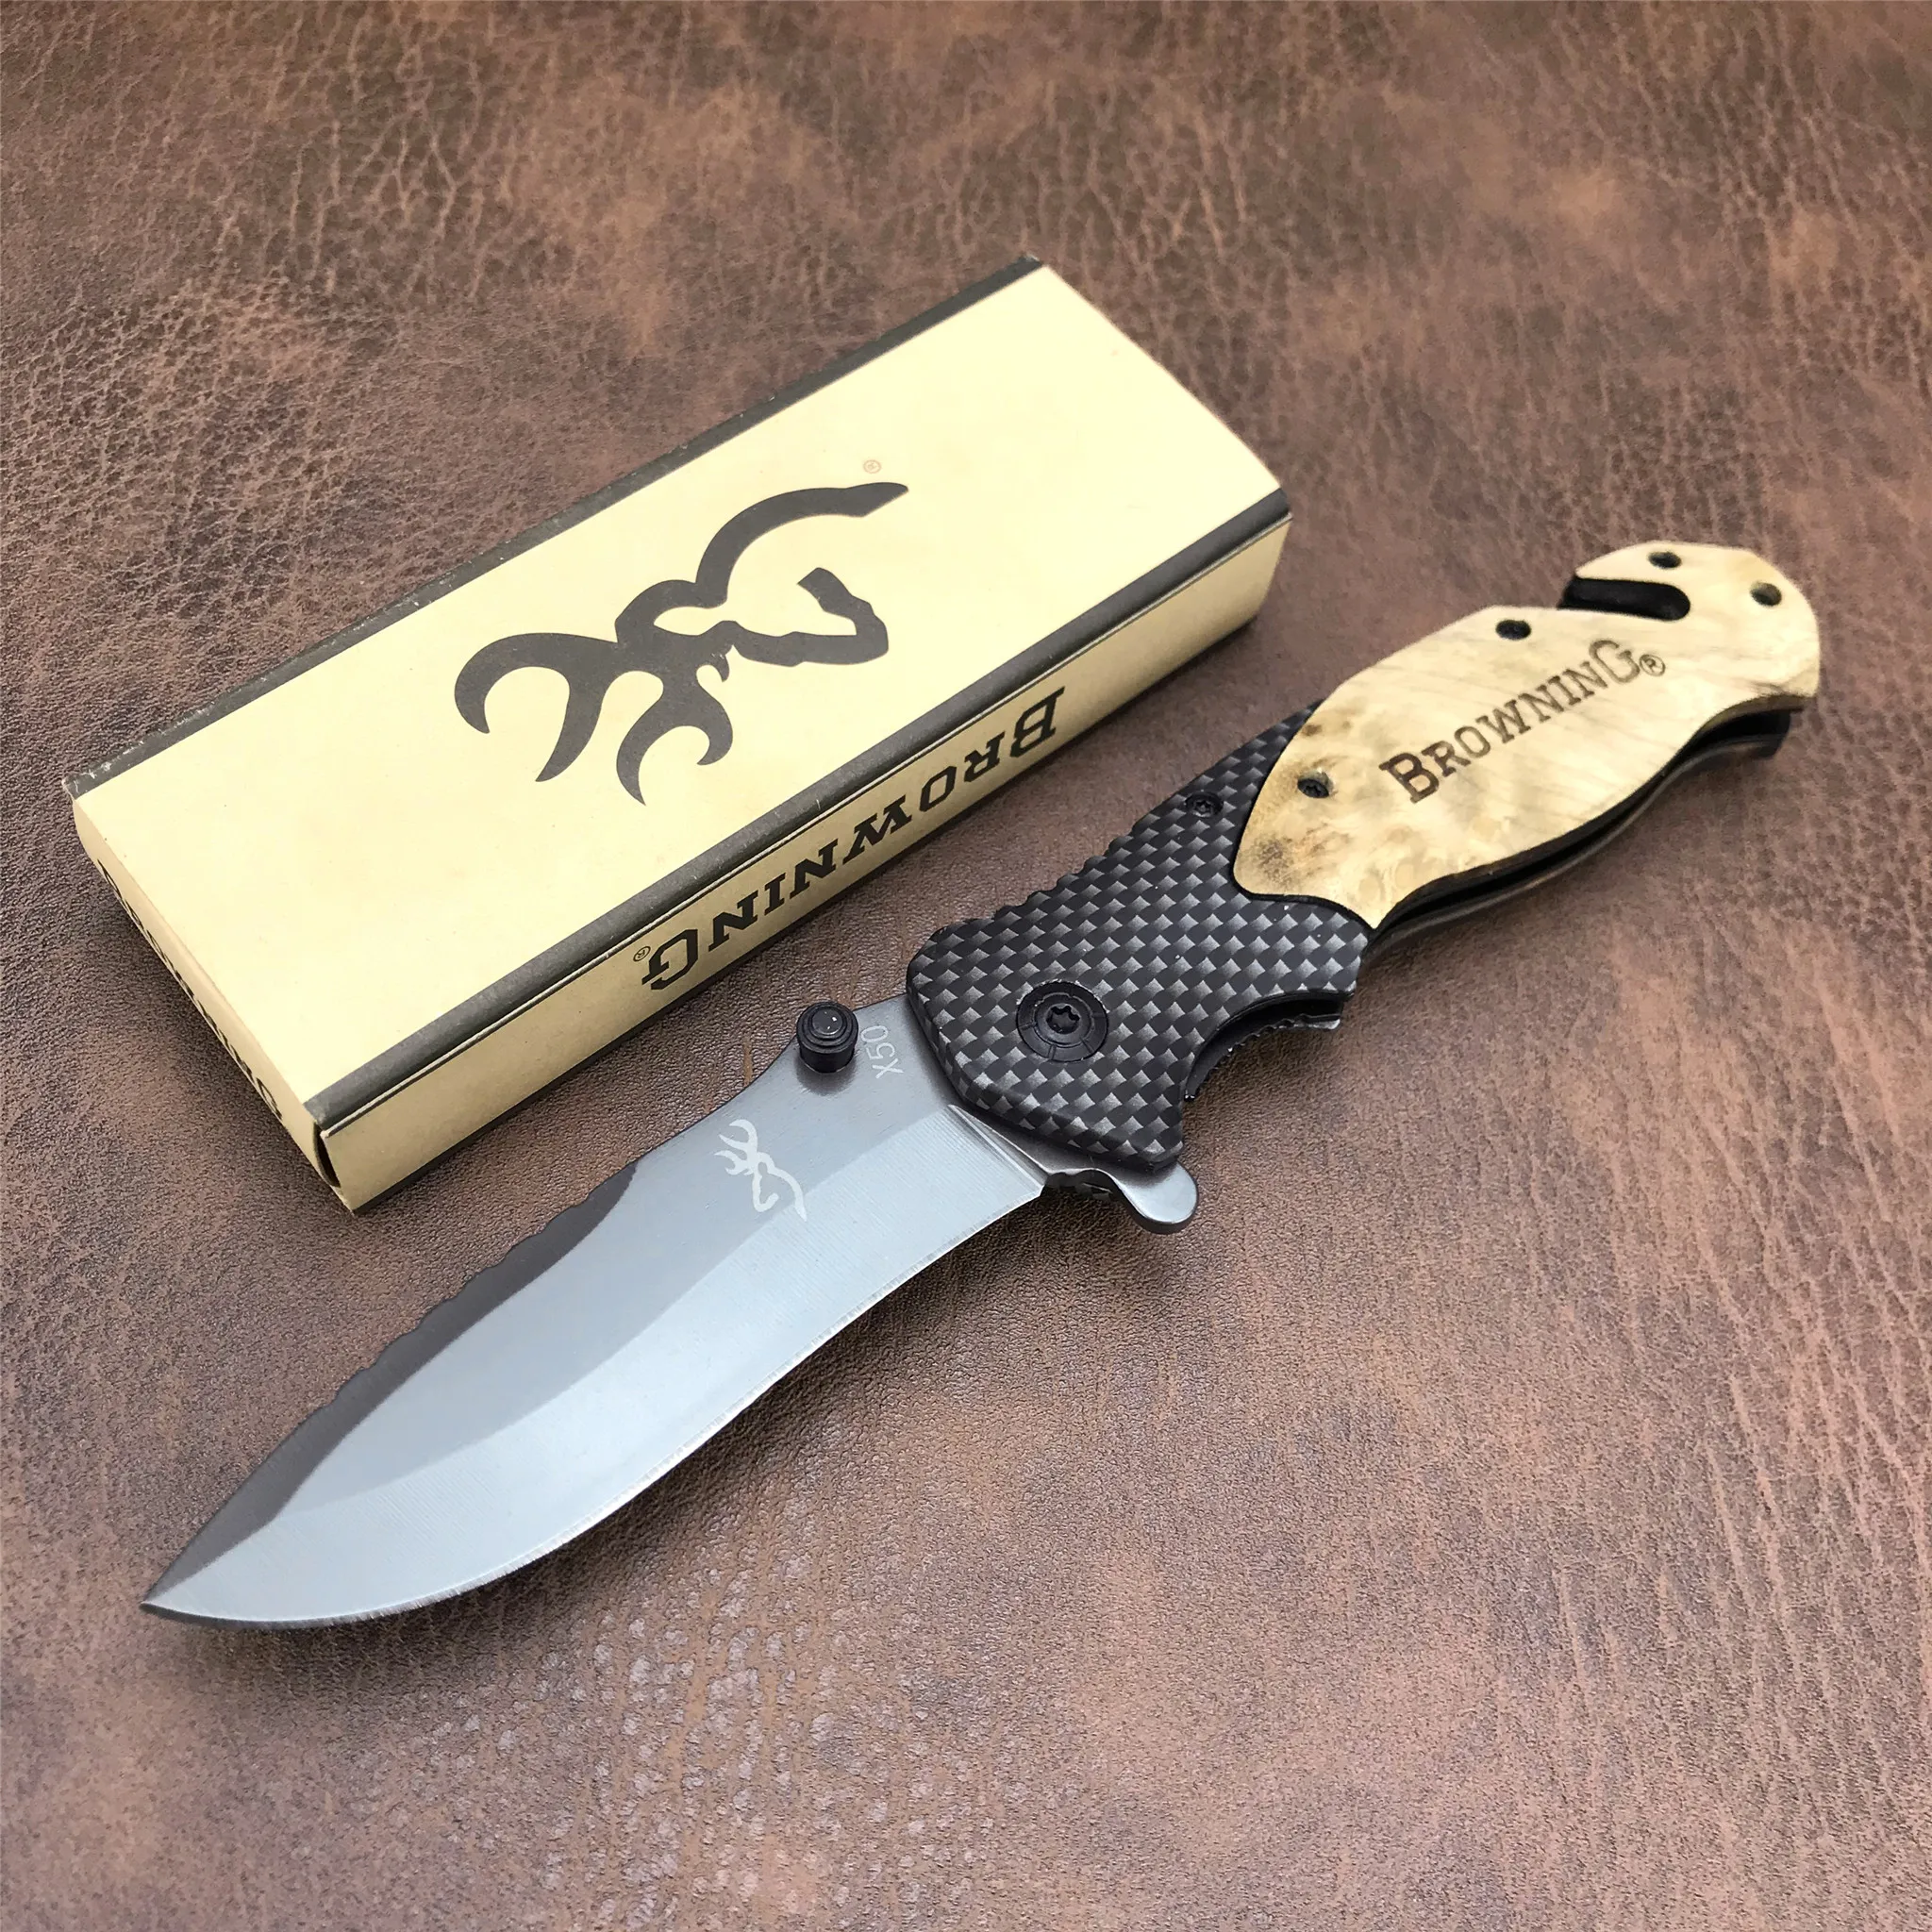 

Browning x50 Folding Blade Knife Military Combat Outdoor Camping Hunting Pocket Utility Survival Tactical EDC Tool Multi Knives